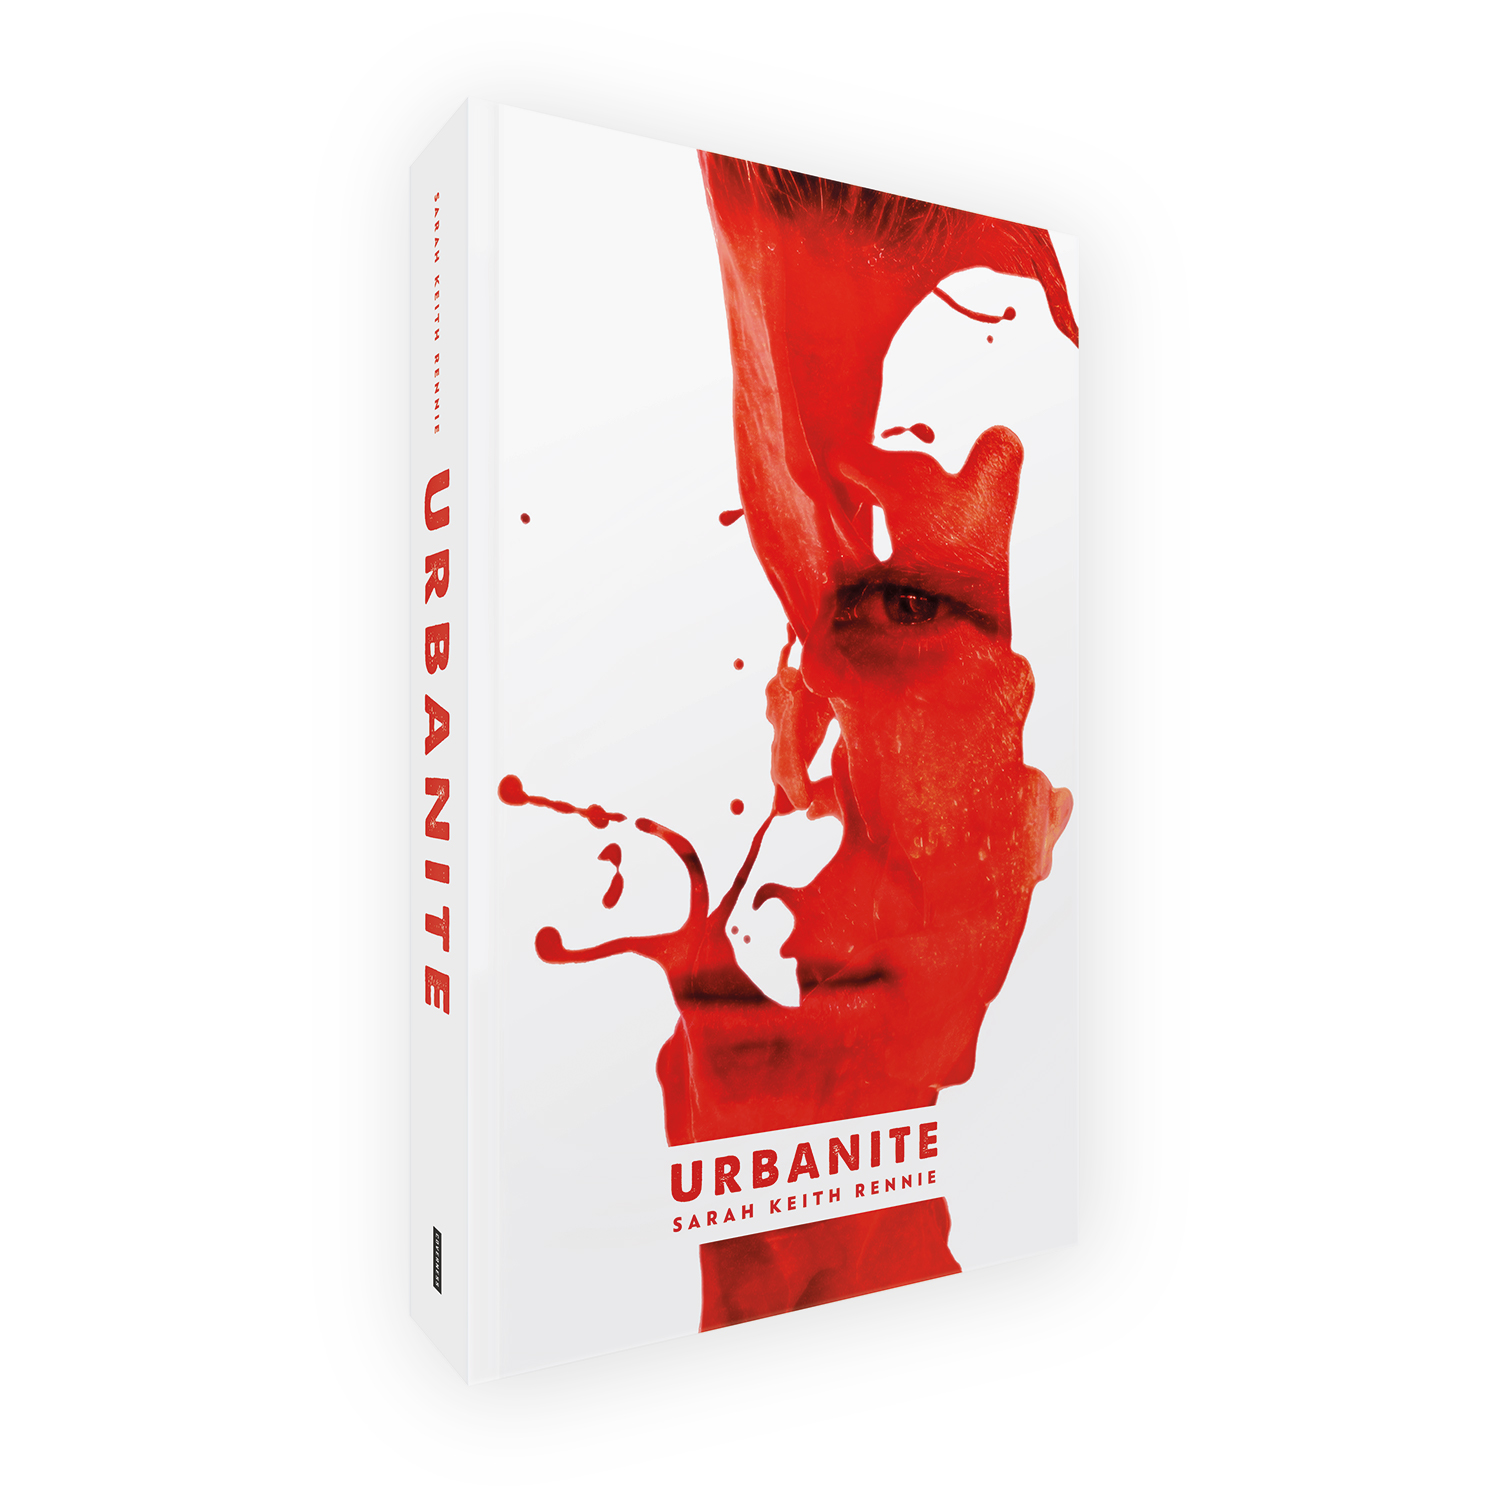 'Urbanite' is a bespoke cover design for a modern horror thriller. The book cover was designed by Mark Thomas, of coverness.com. To find out more about my book design services, please visit www.coverness.com.